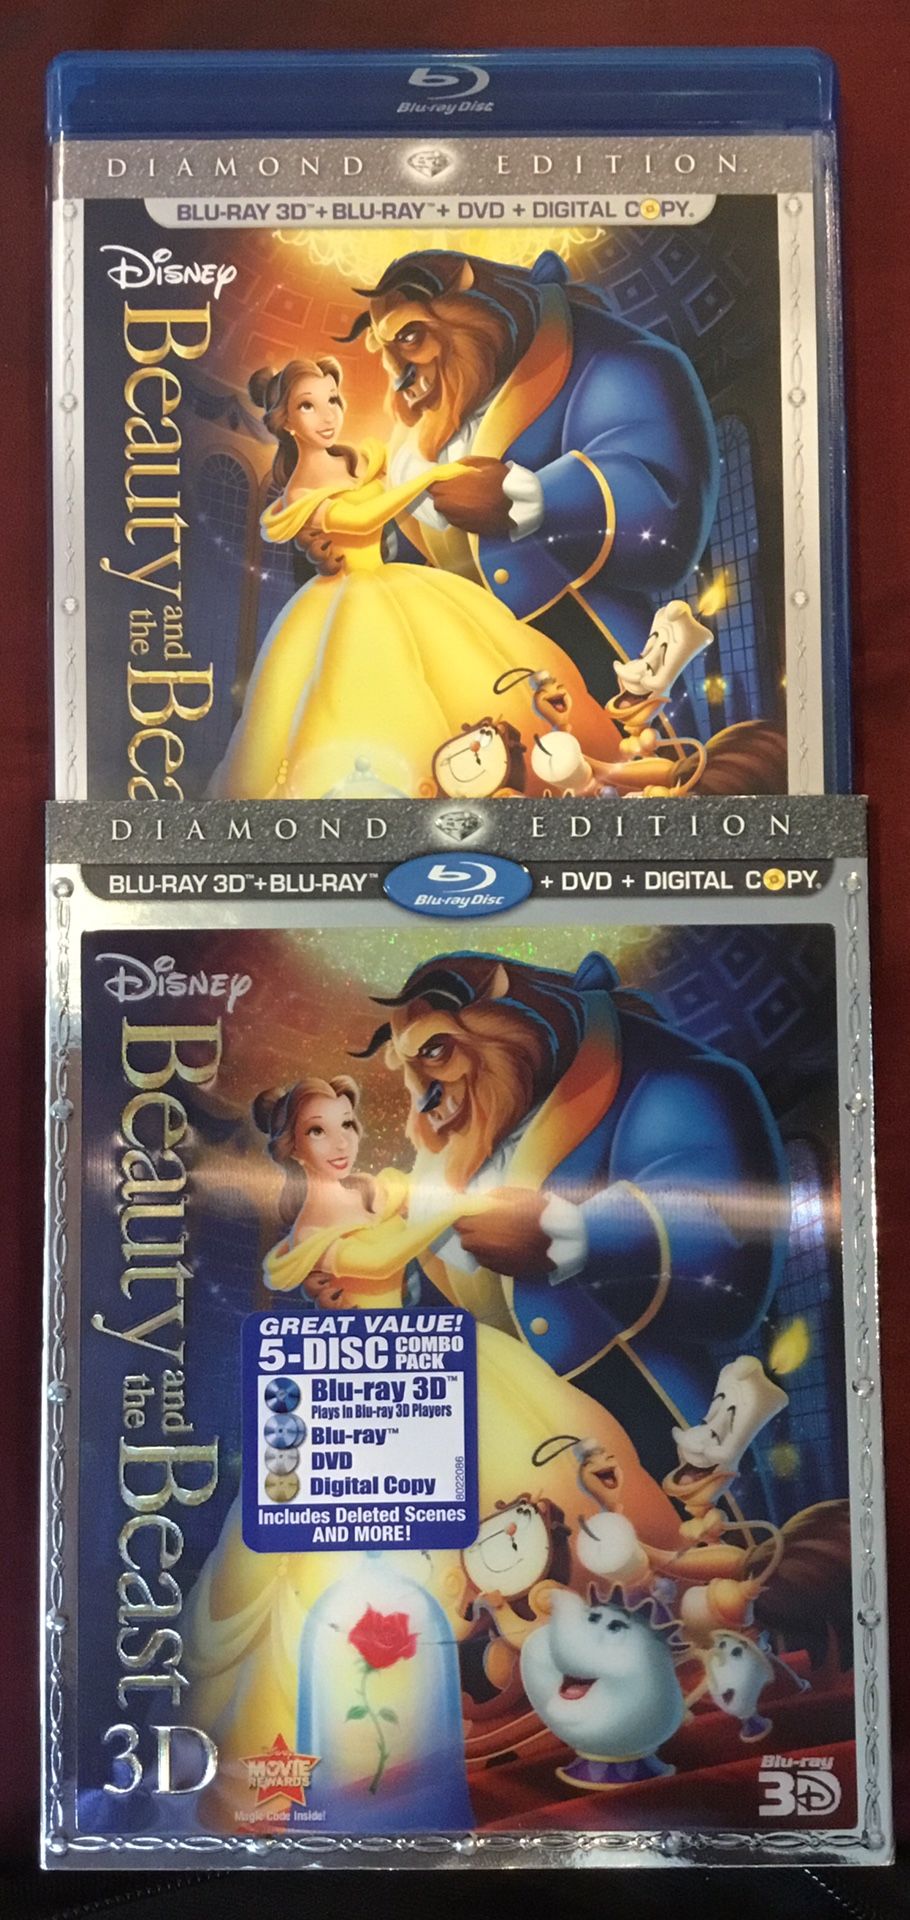 Beauty and the Beast “5” Disc. ‘DIAMOND EDITION’ - Mint Condition! Collectors Item!